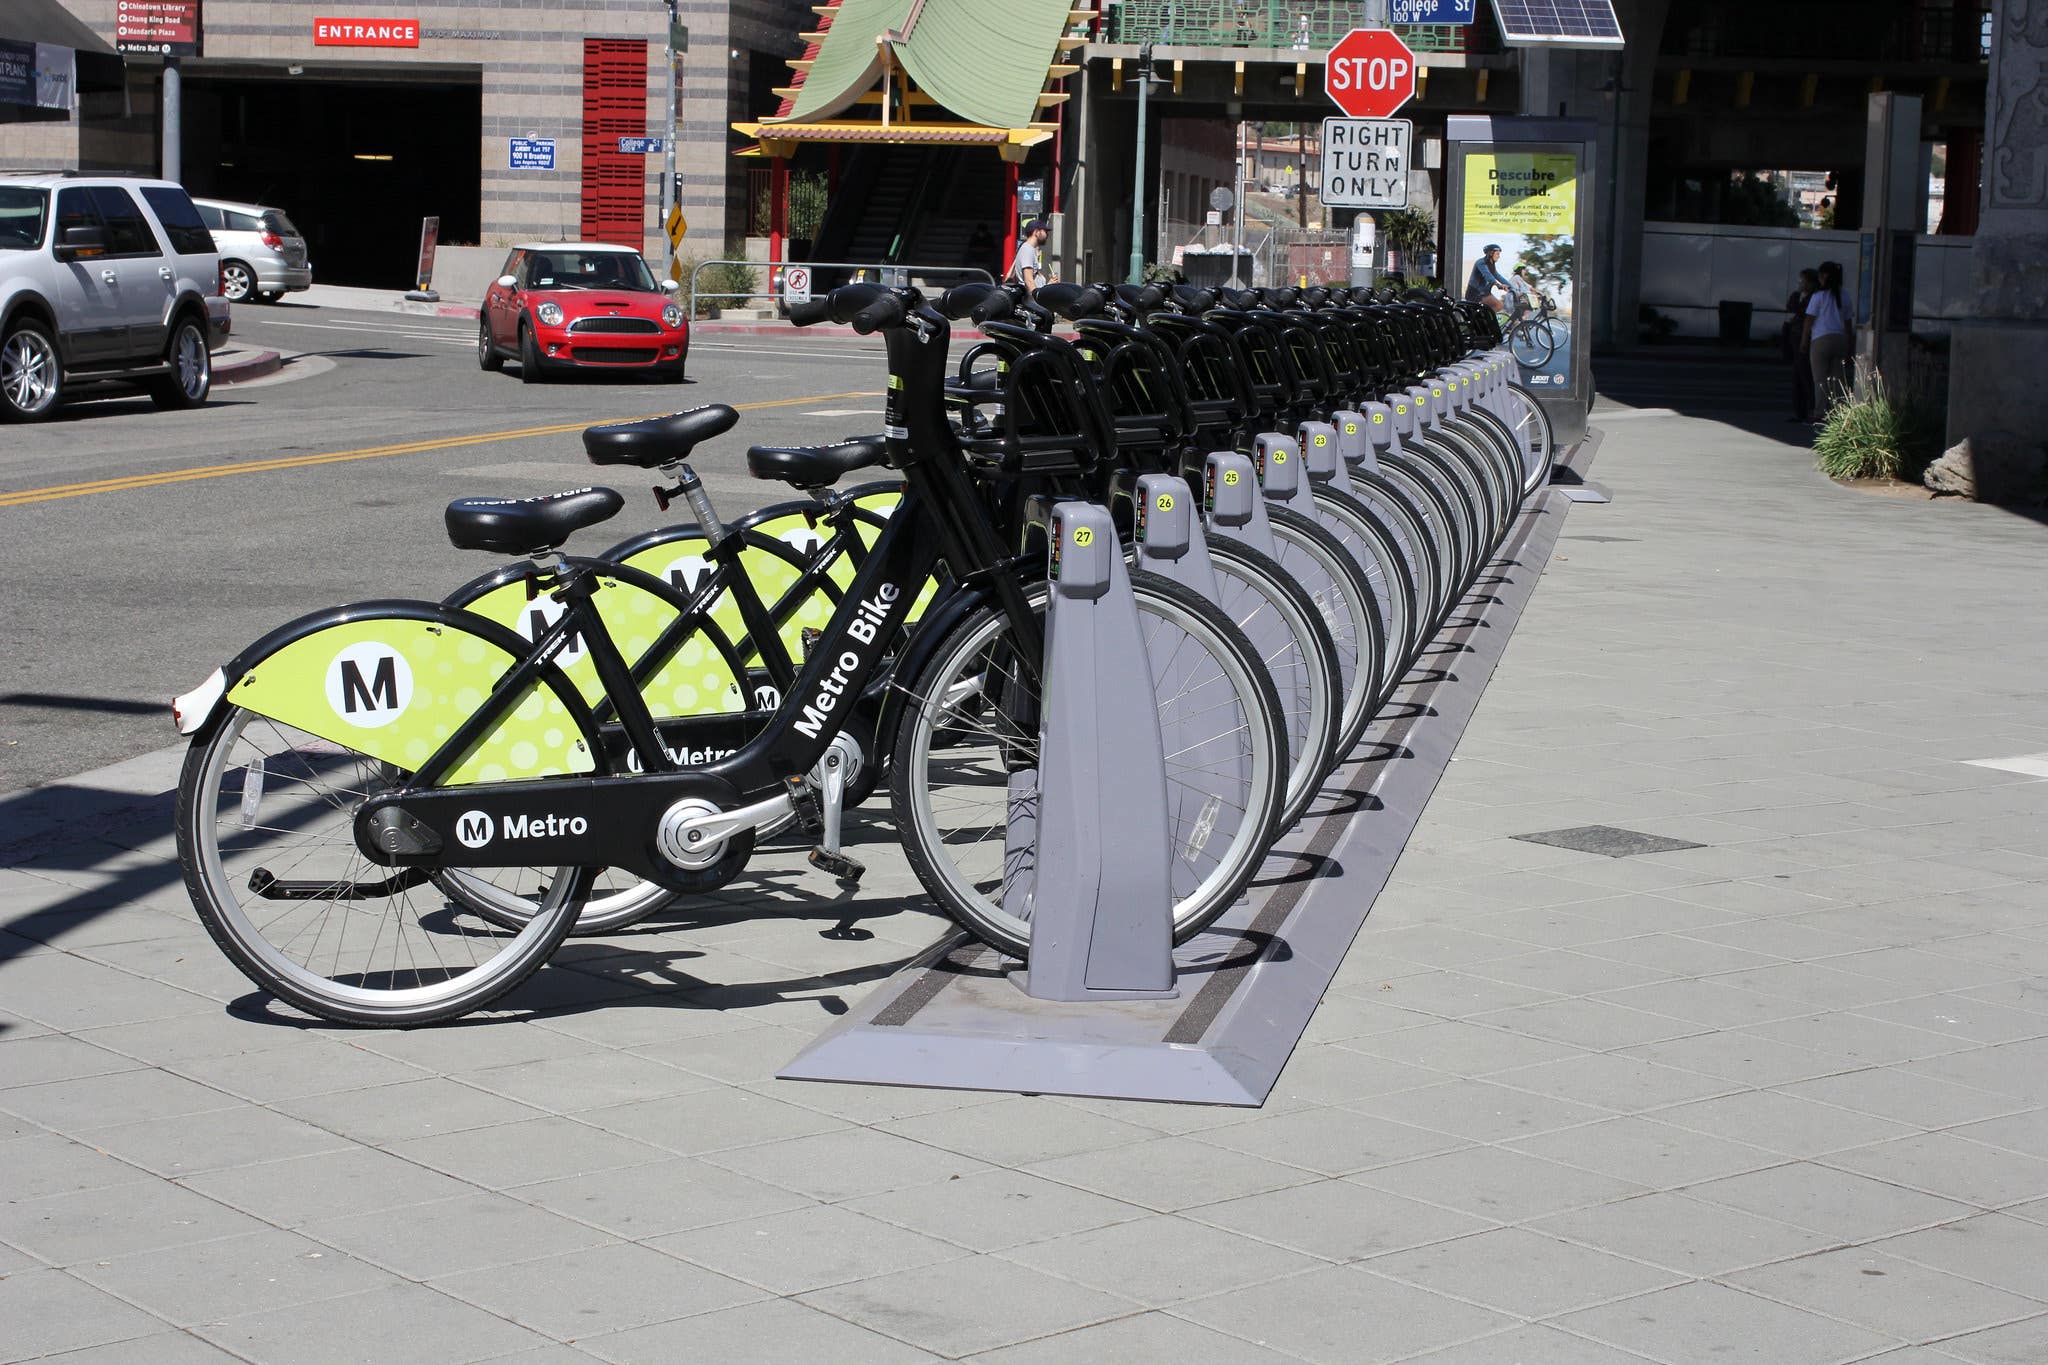 Metro Bike Share at the L Line (Gold) Chinatown station